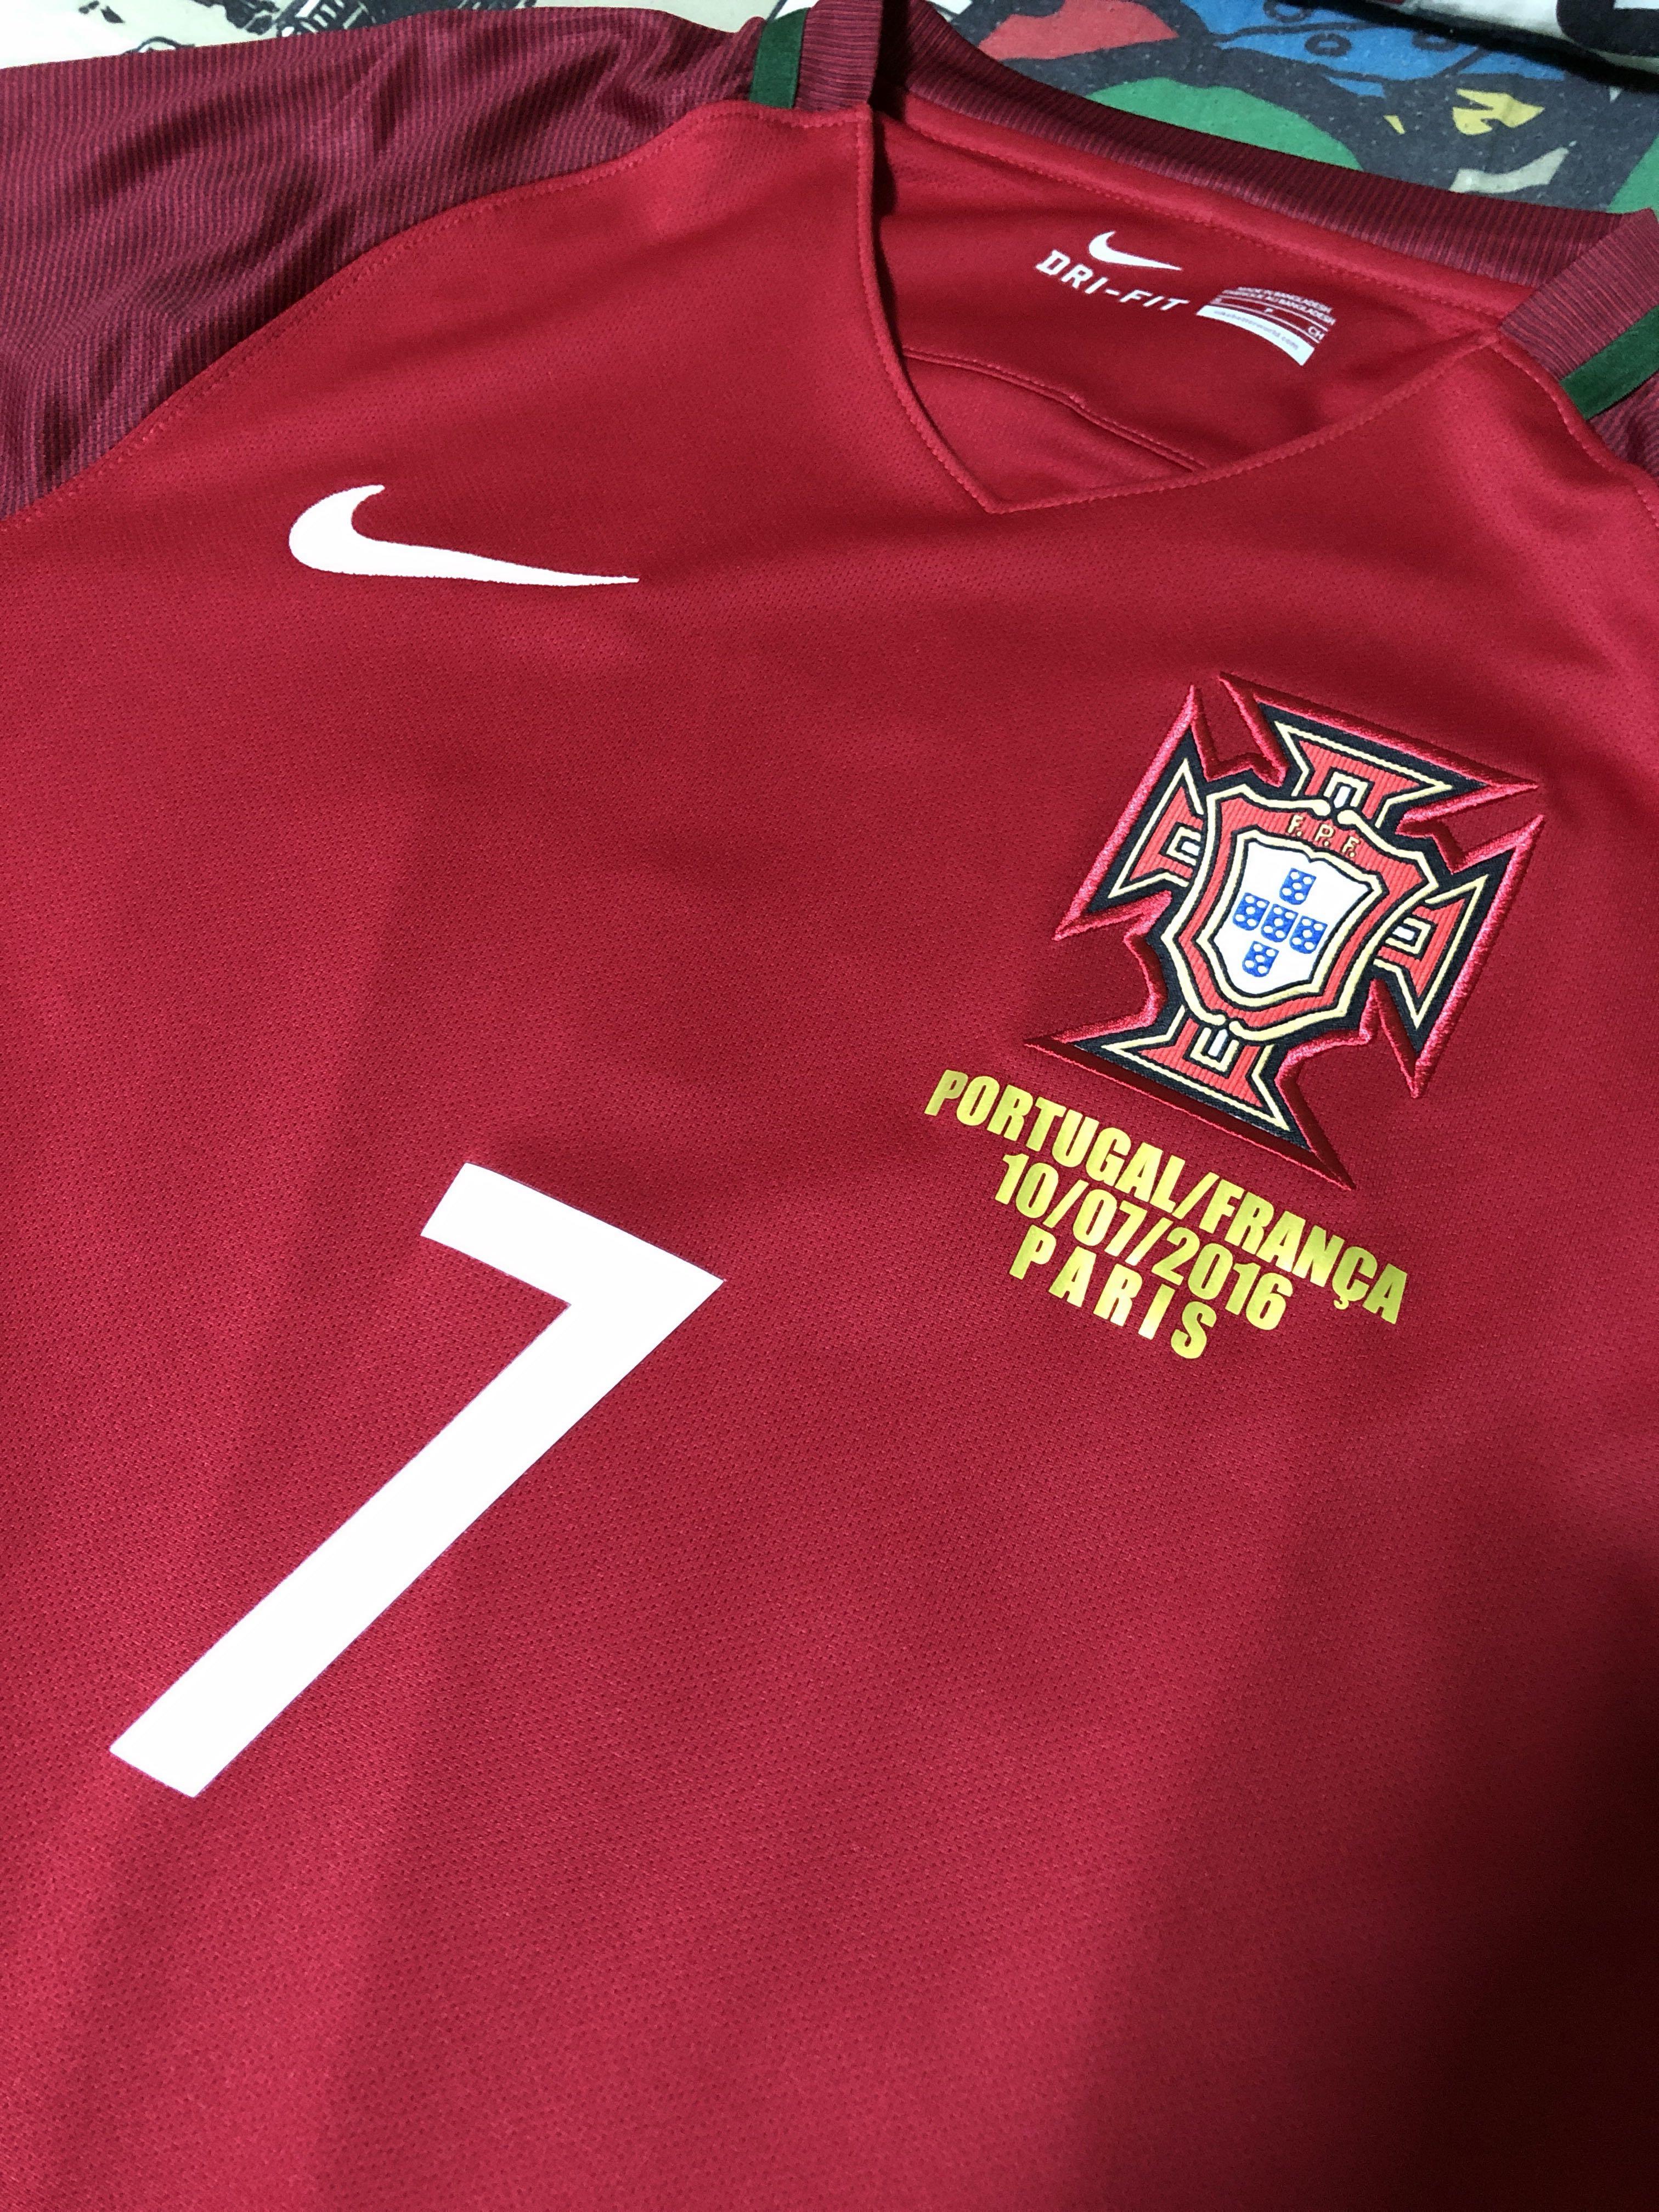 Euro 2016 Finals Jersey (Portugal 